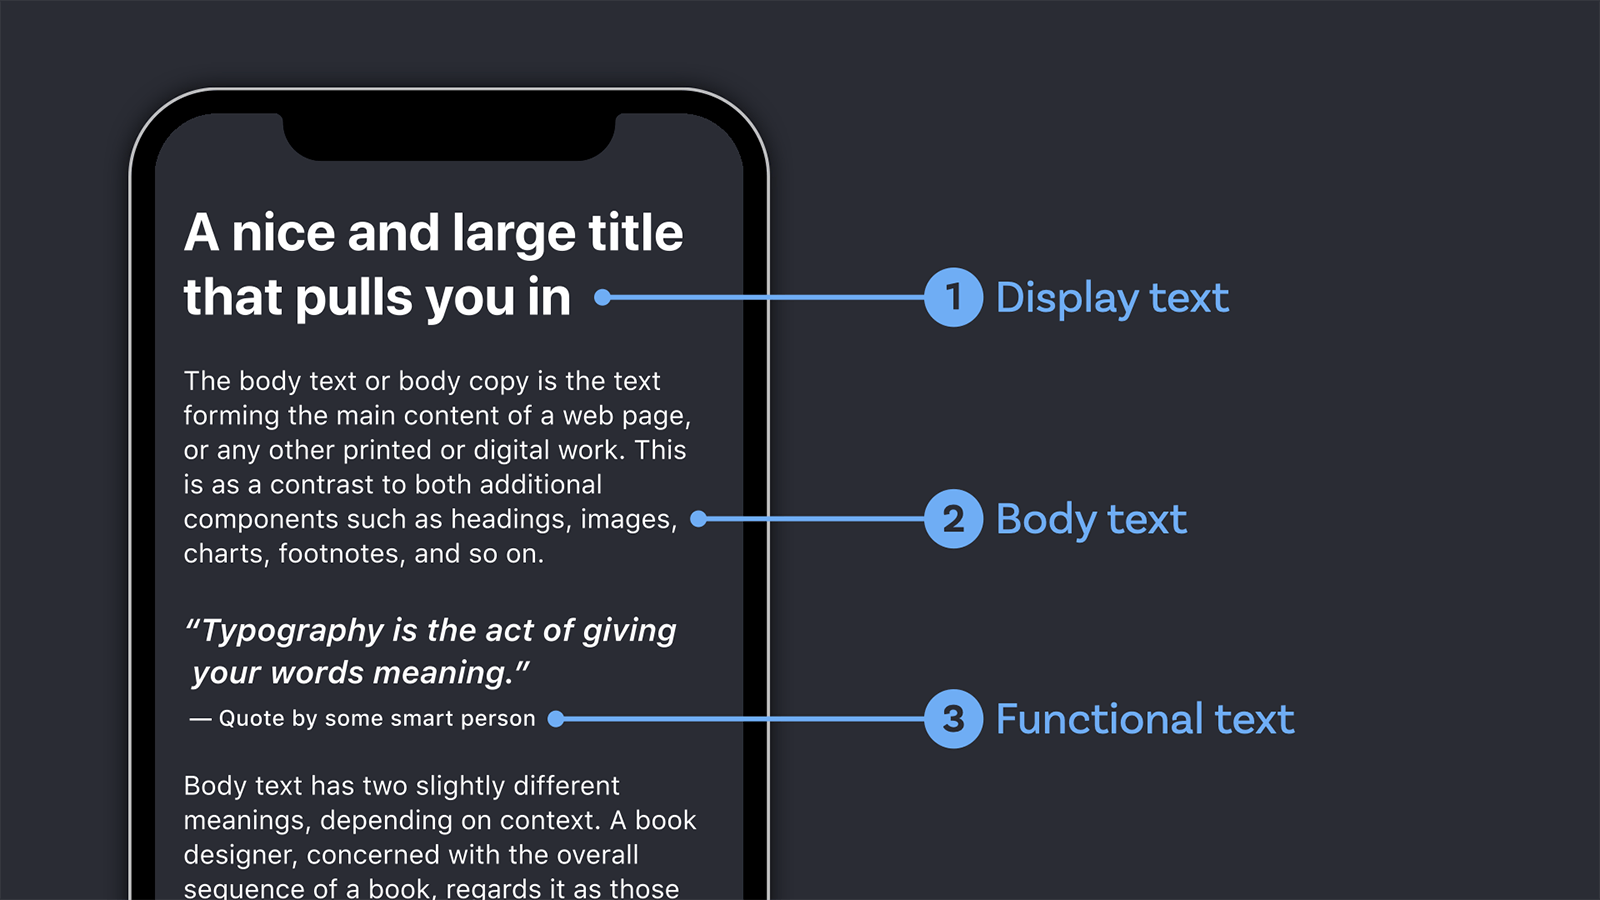 The different types of text shown in an app. 1. Display text is pointing to the headline. 2. Body text is pointing to long reading text below it. 3. Functional text is pointing to the caption below a pullquote.